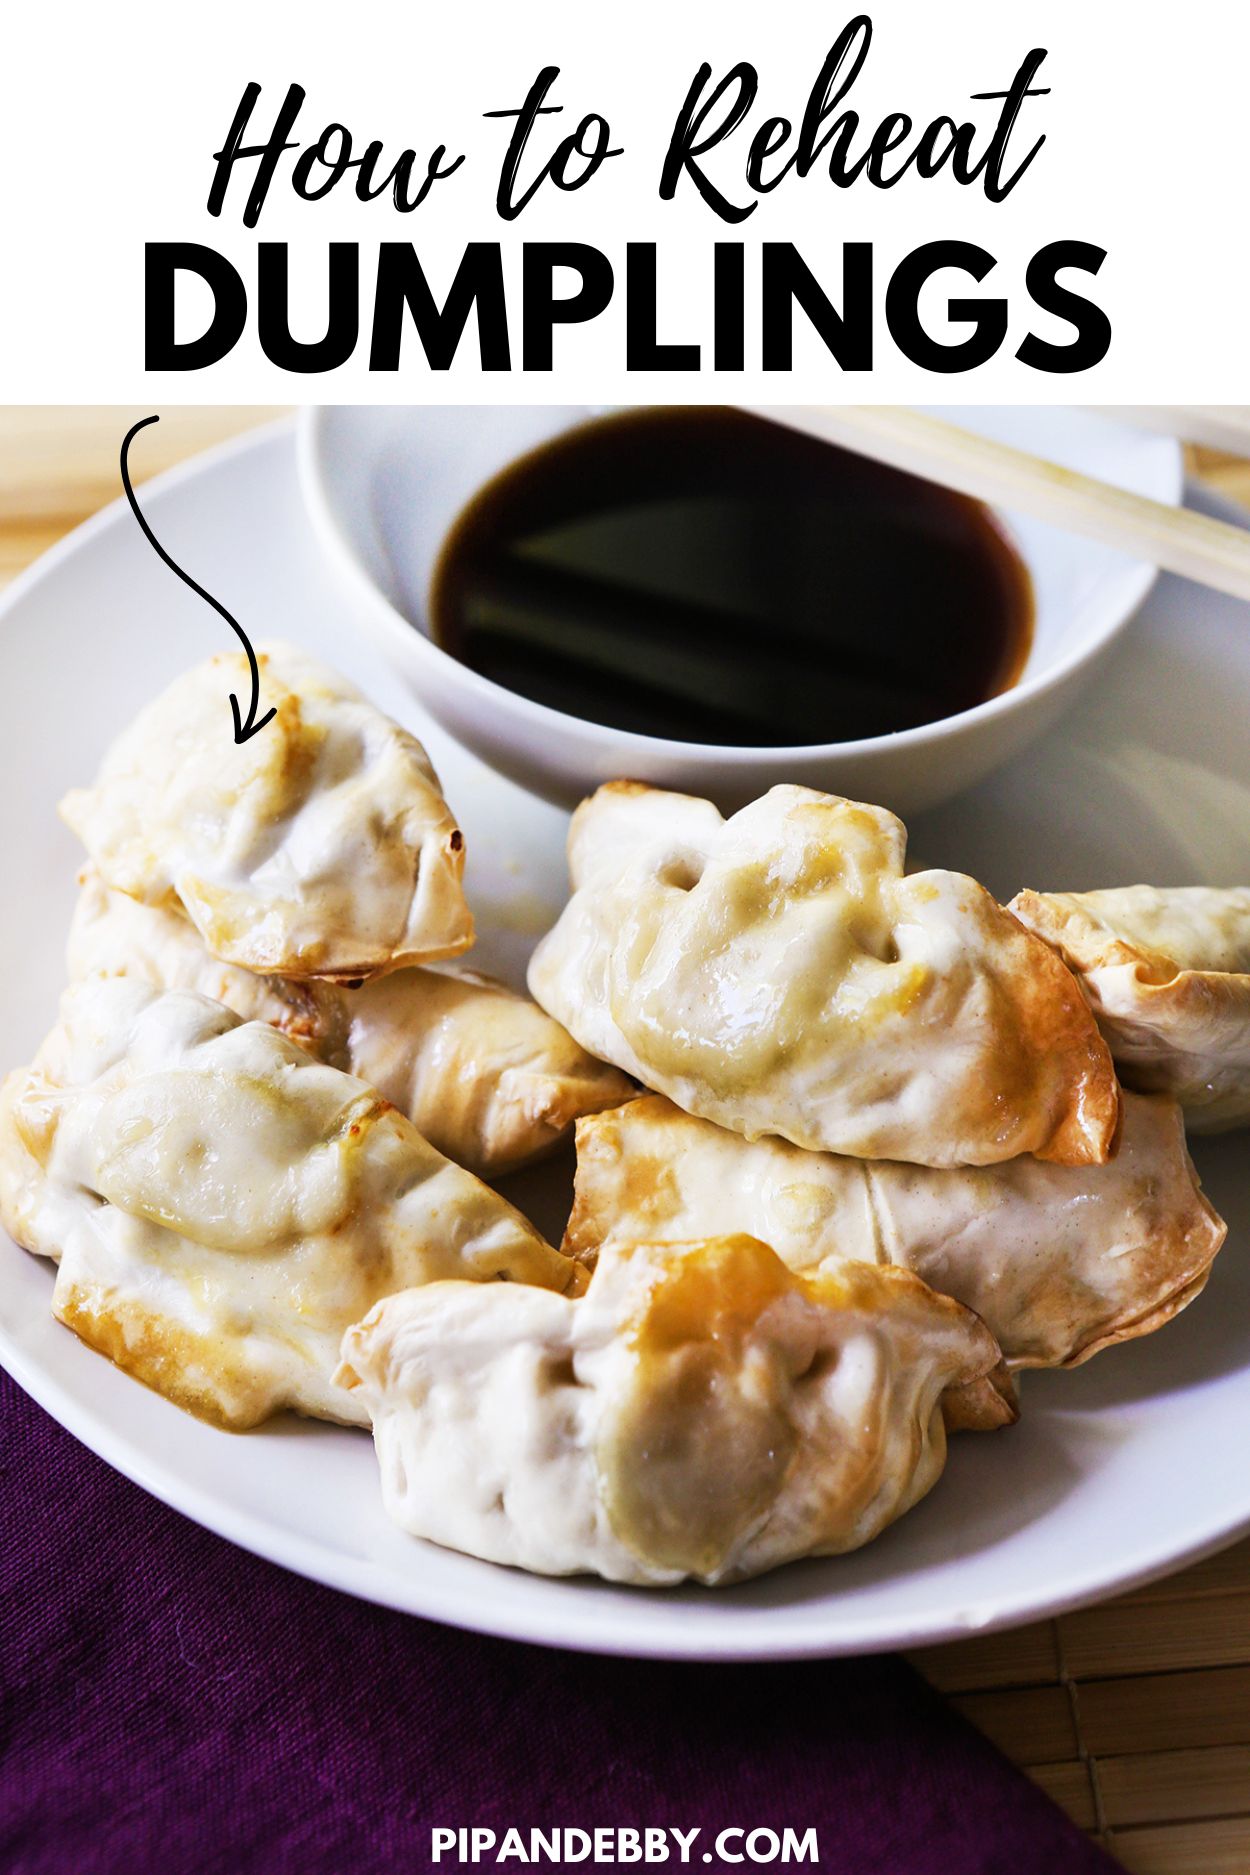 Plate of stacked cooked dumplings with text overlay reading, "How to reheat dumplings."